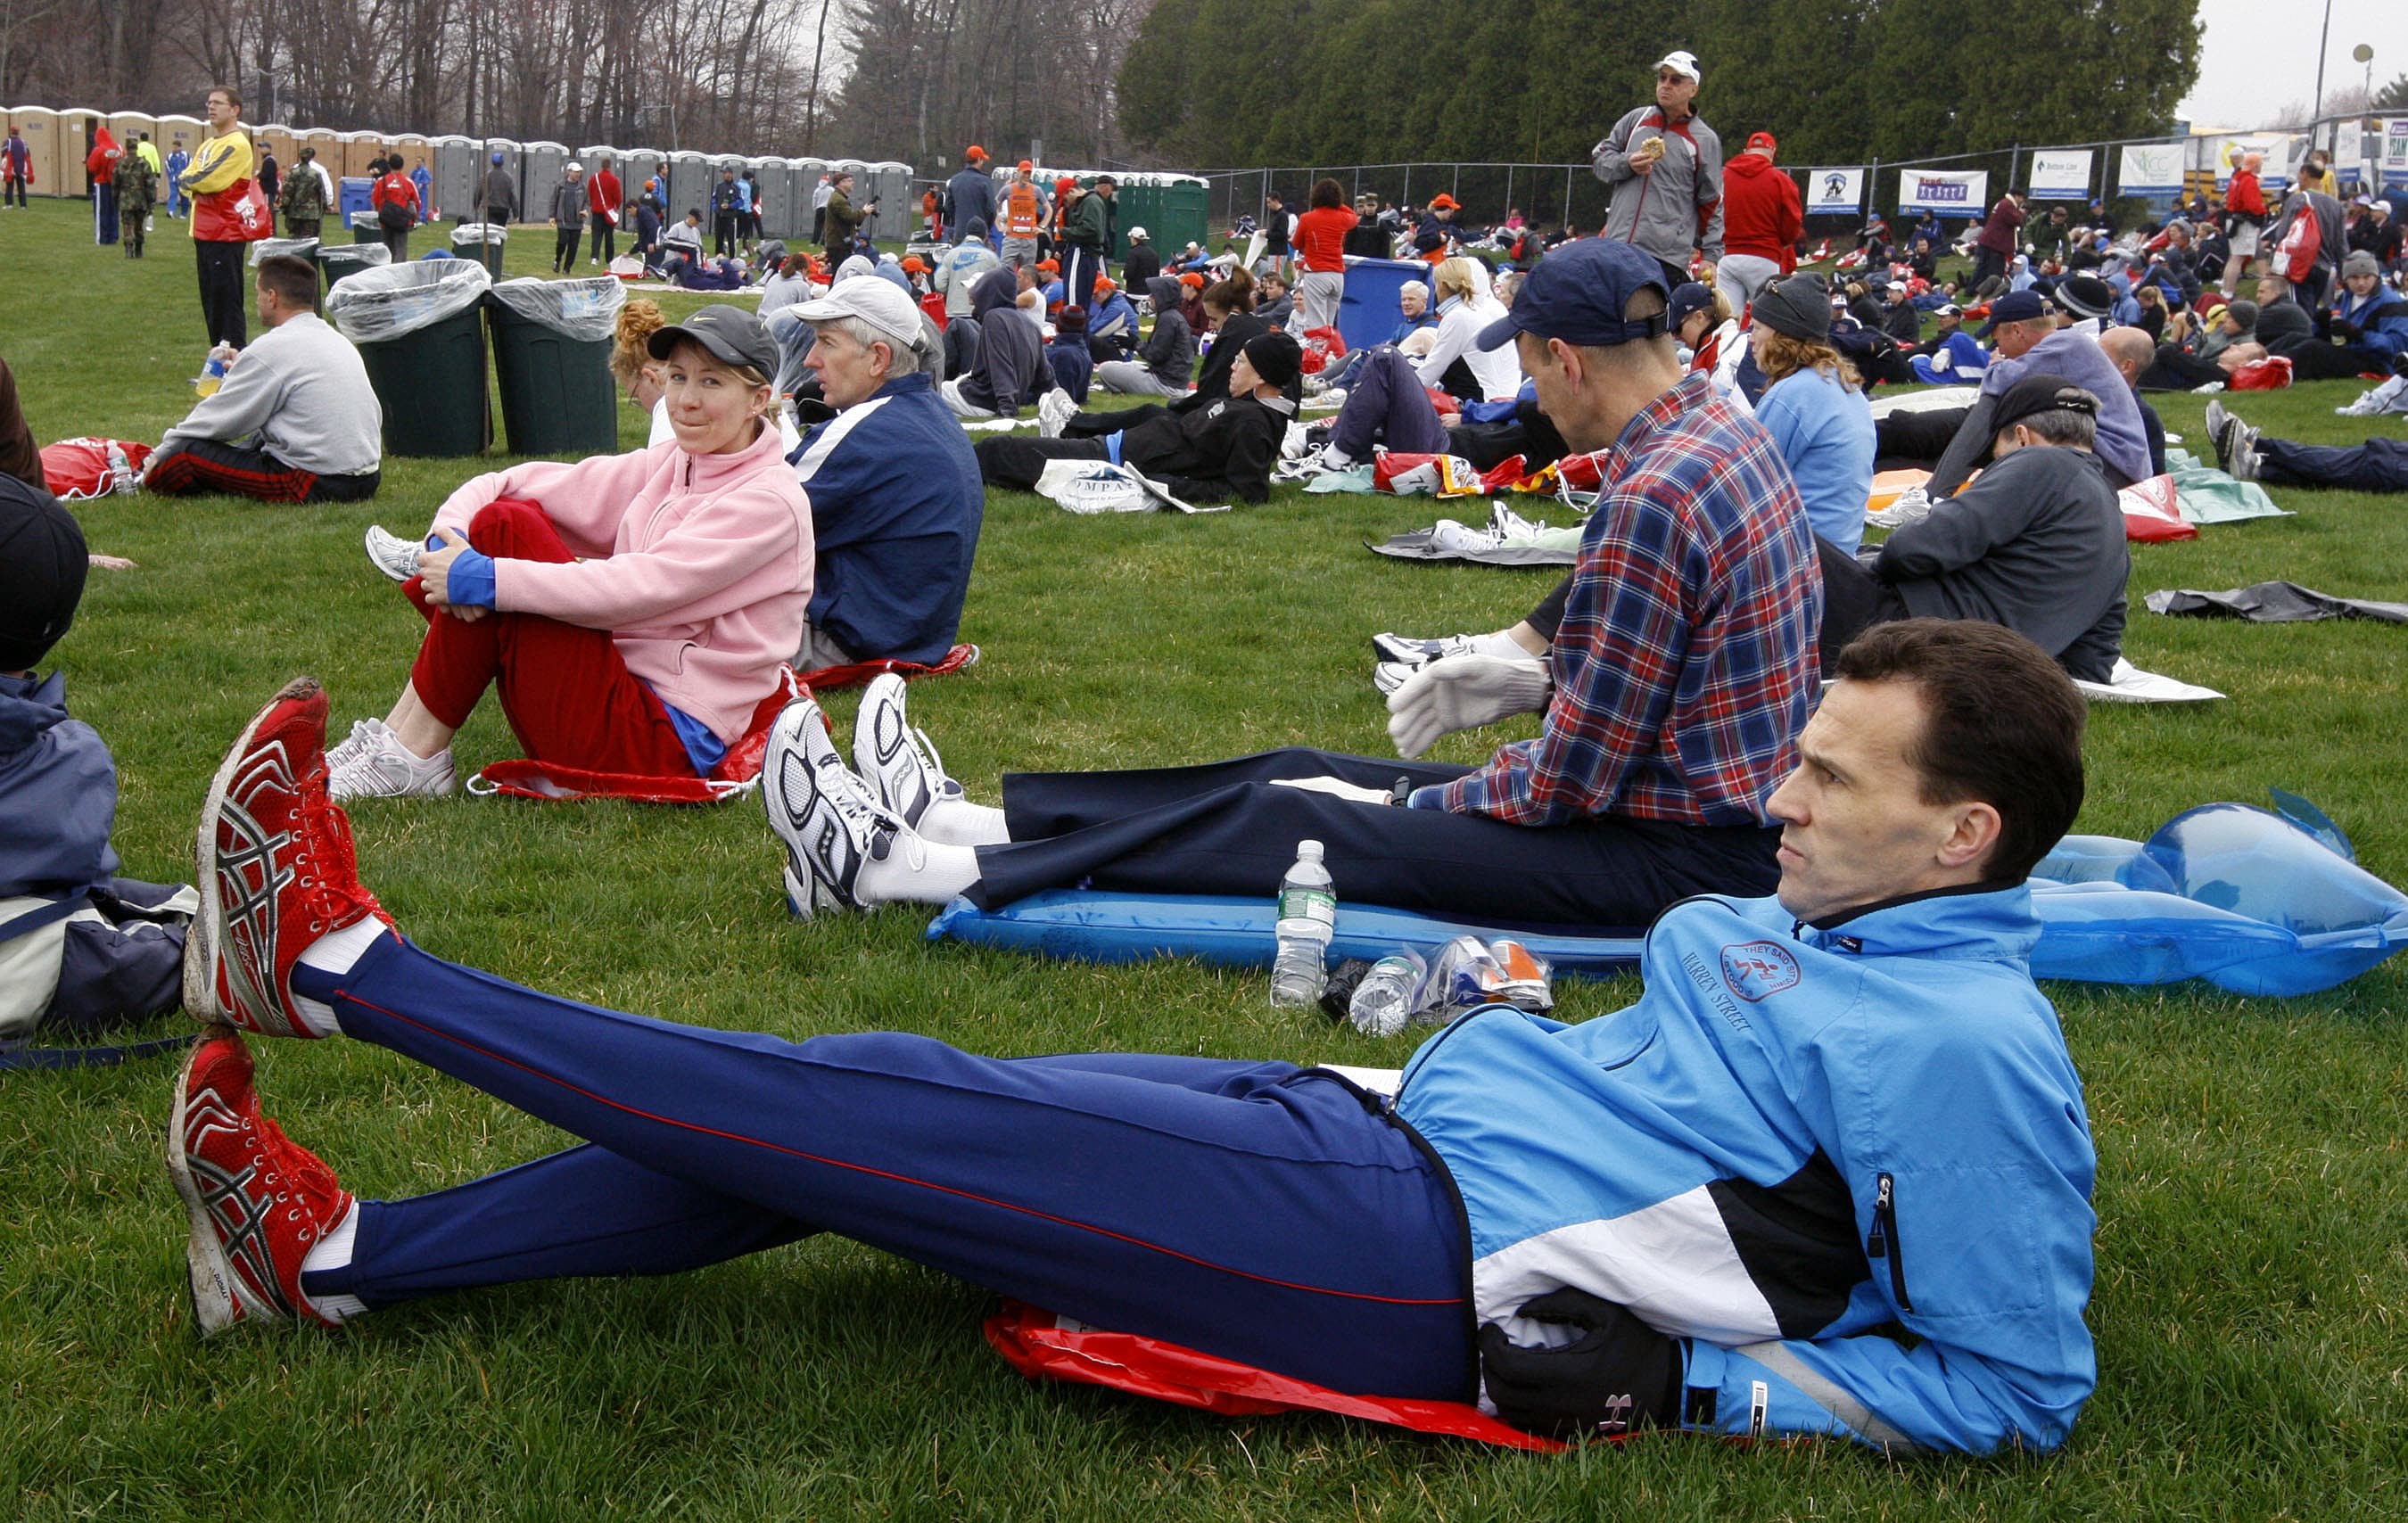 In this April 21, 2008 photo, Paul Thompson of Kettering, England, stretches in the Athlete's Village prior to the start of the 112th Boston Marathon in Hopkinton, Mass. (Bizuayehu Tesfaye/AP)